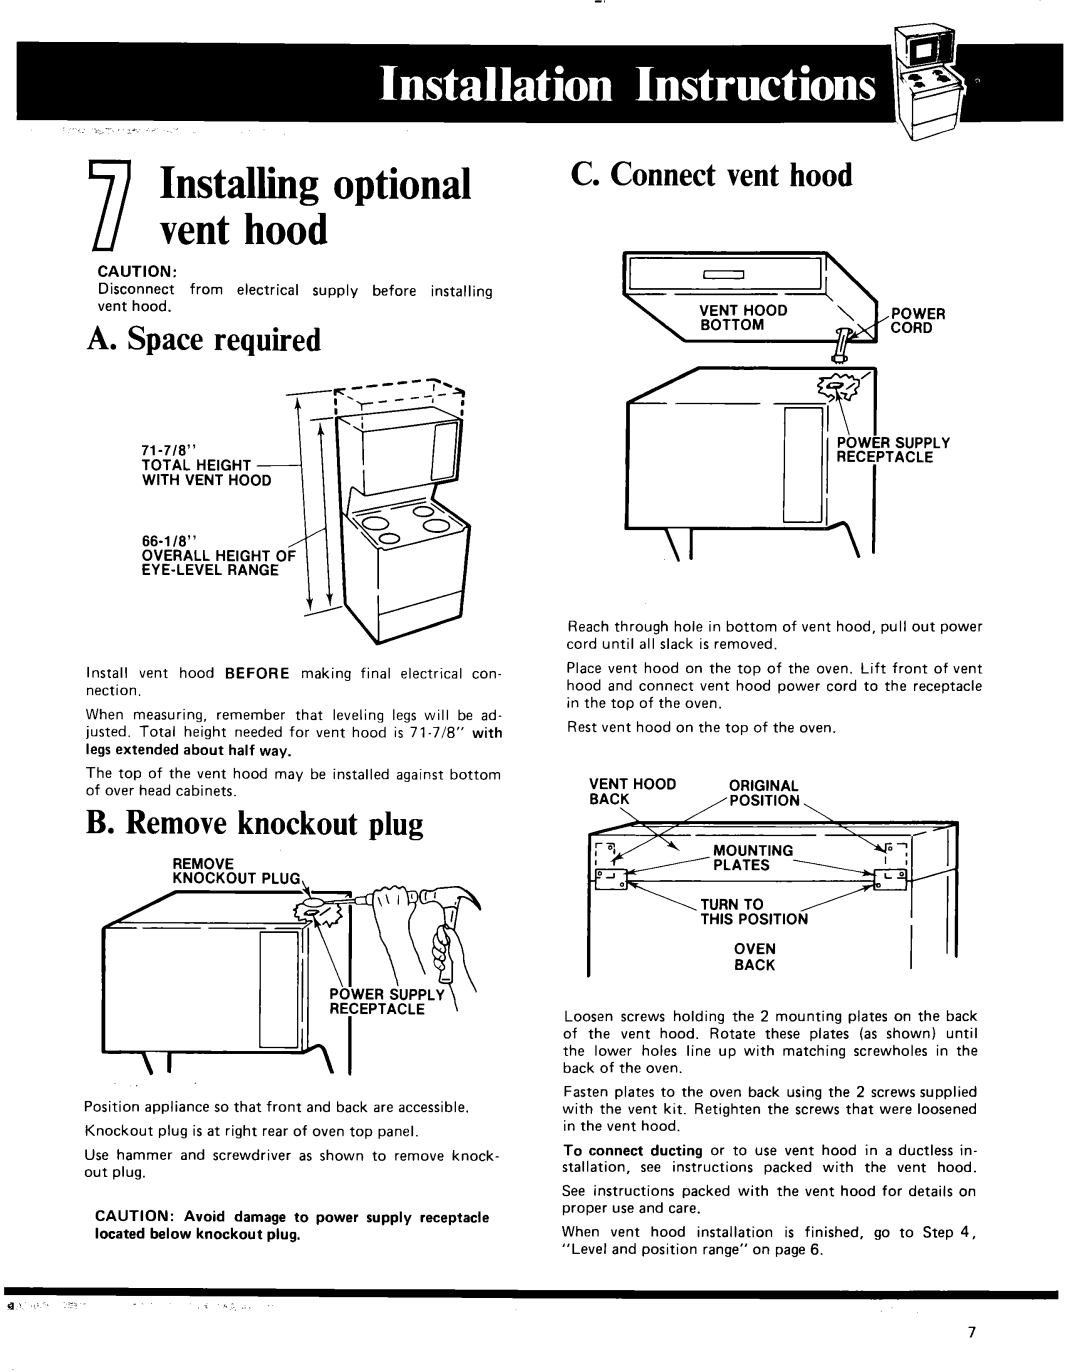 Whirlpool 30 eye-level range A. Spacerequired, B. Removeknockout plug, C. Connectvent hood, legs extended about half way 